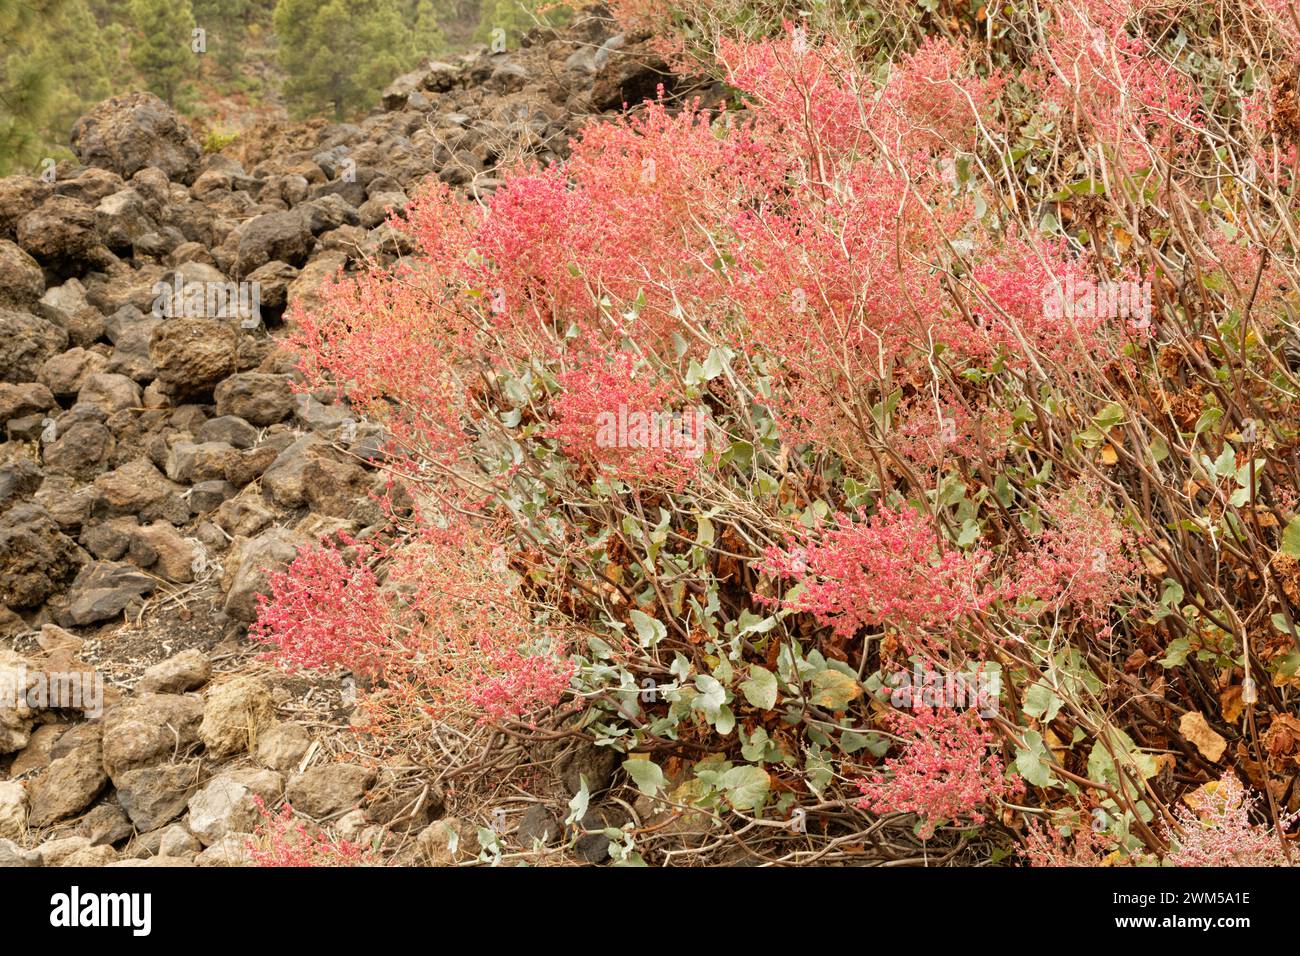 Madeira sorrel (Rumex maderensis), endemic to Madeira and the Canaries, flowering on an old lava flow, Teide National Park, Tenerife, Canary Islands, Stock Photo